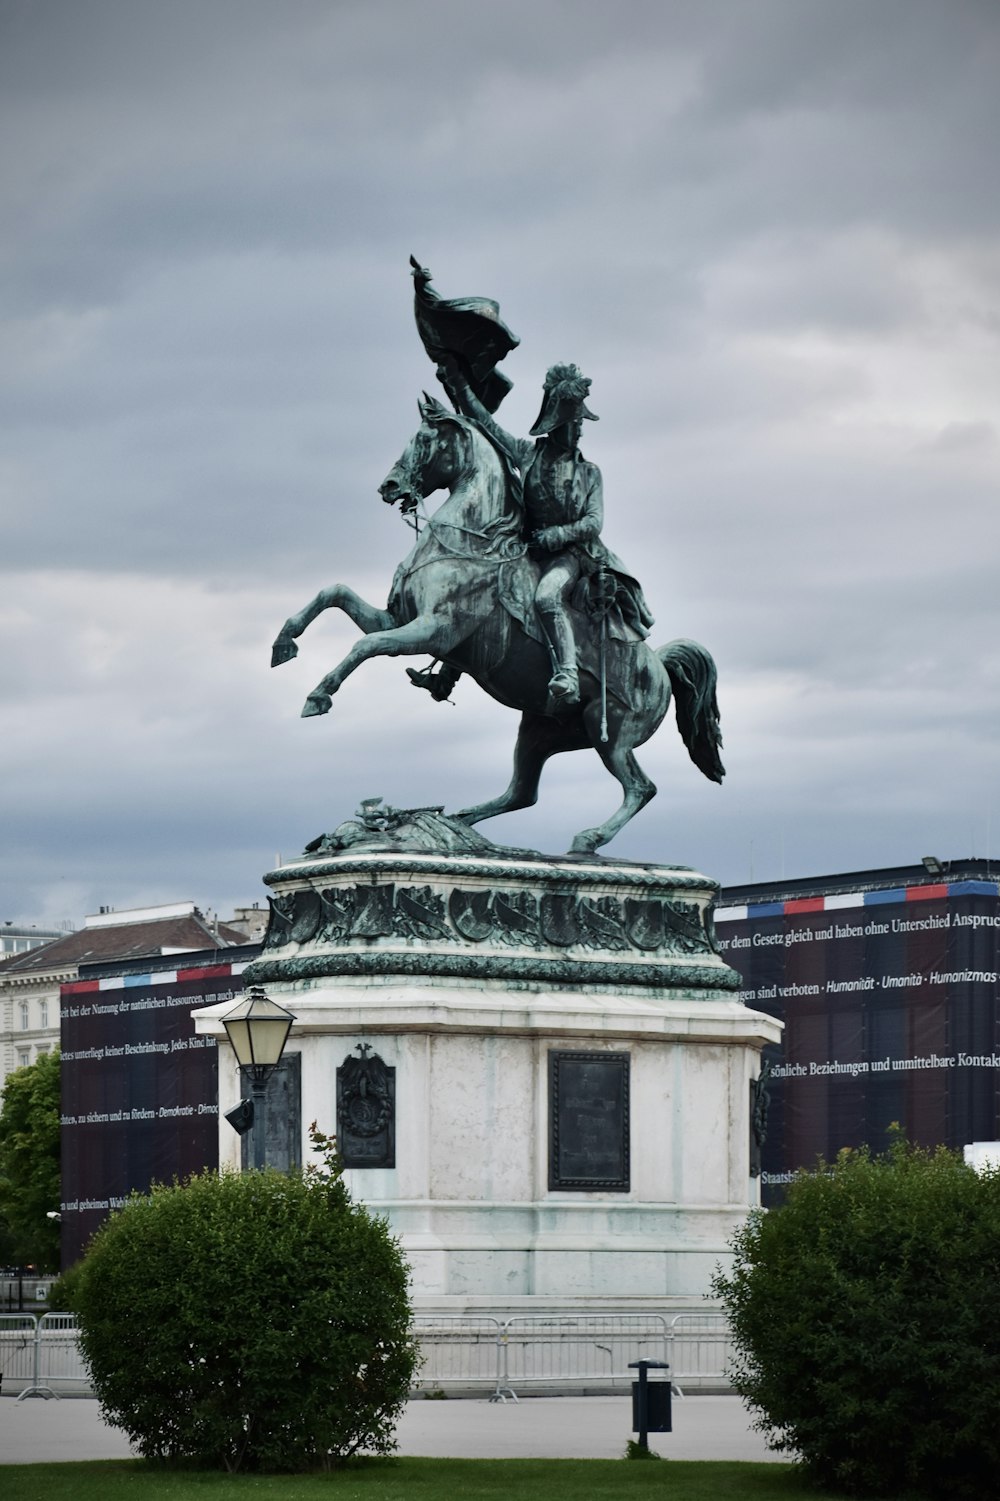 man riding horse statue near building during daytime